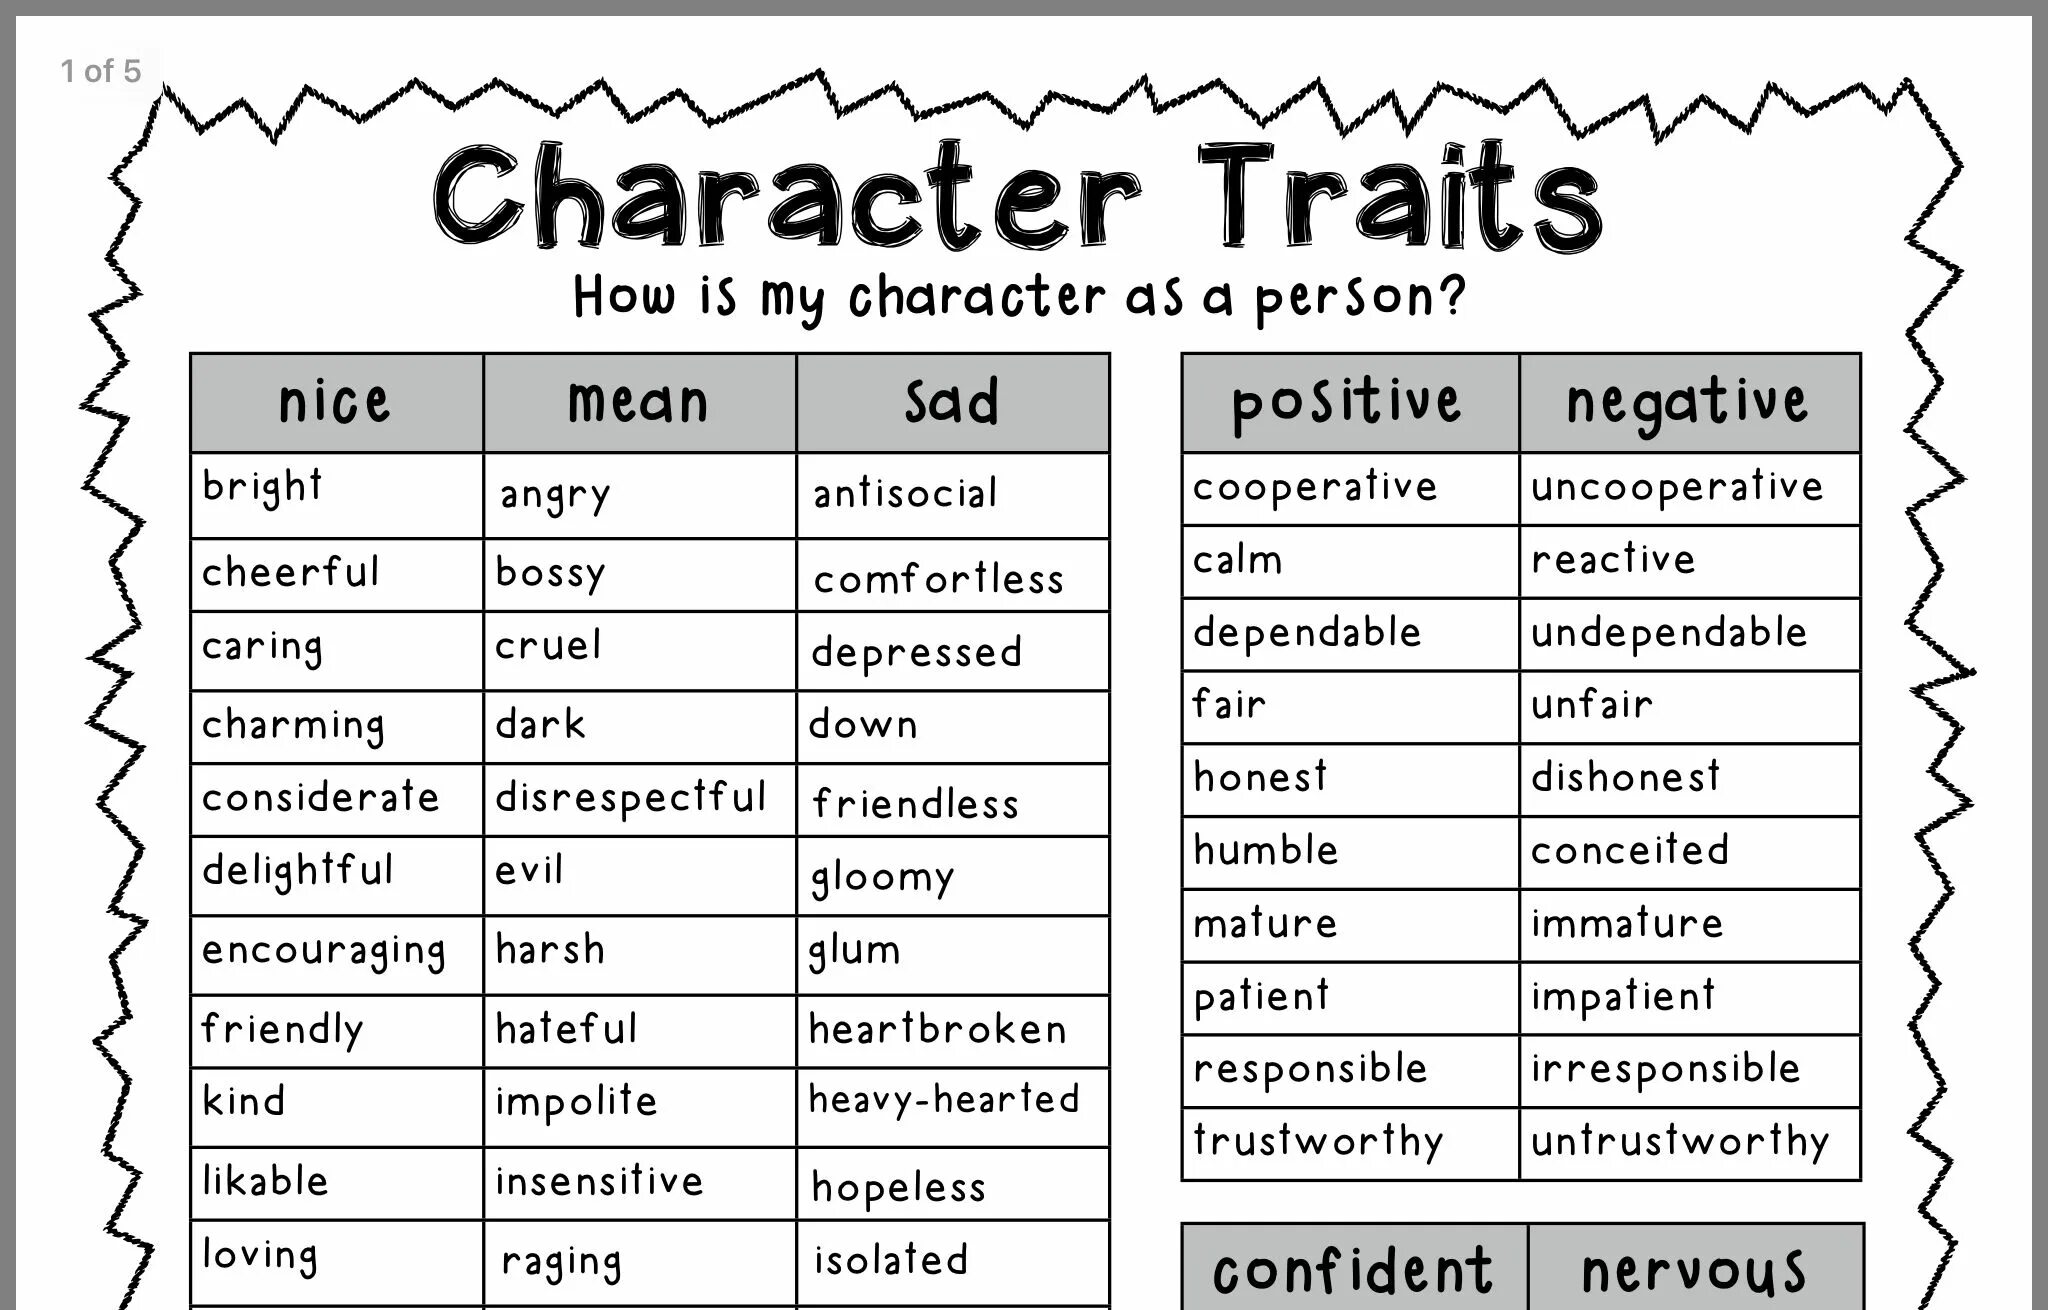 Character traits list. Positive and negative traits of character. Character qualities. Personal traits of character.